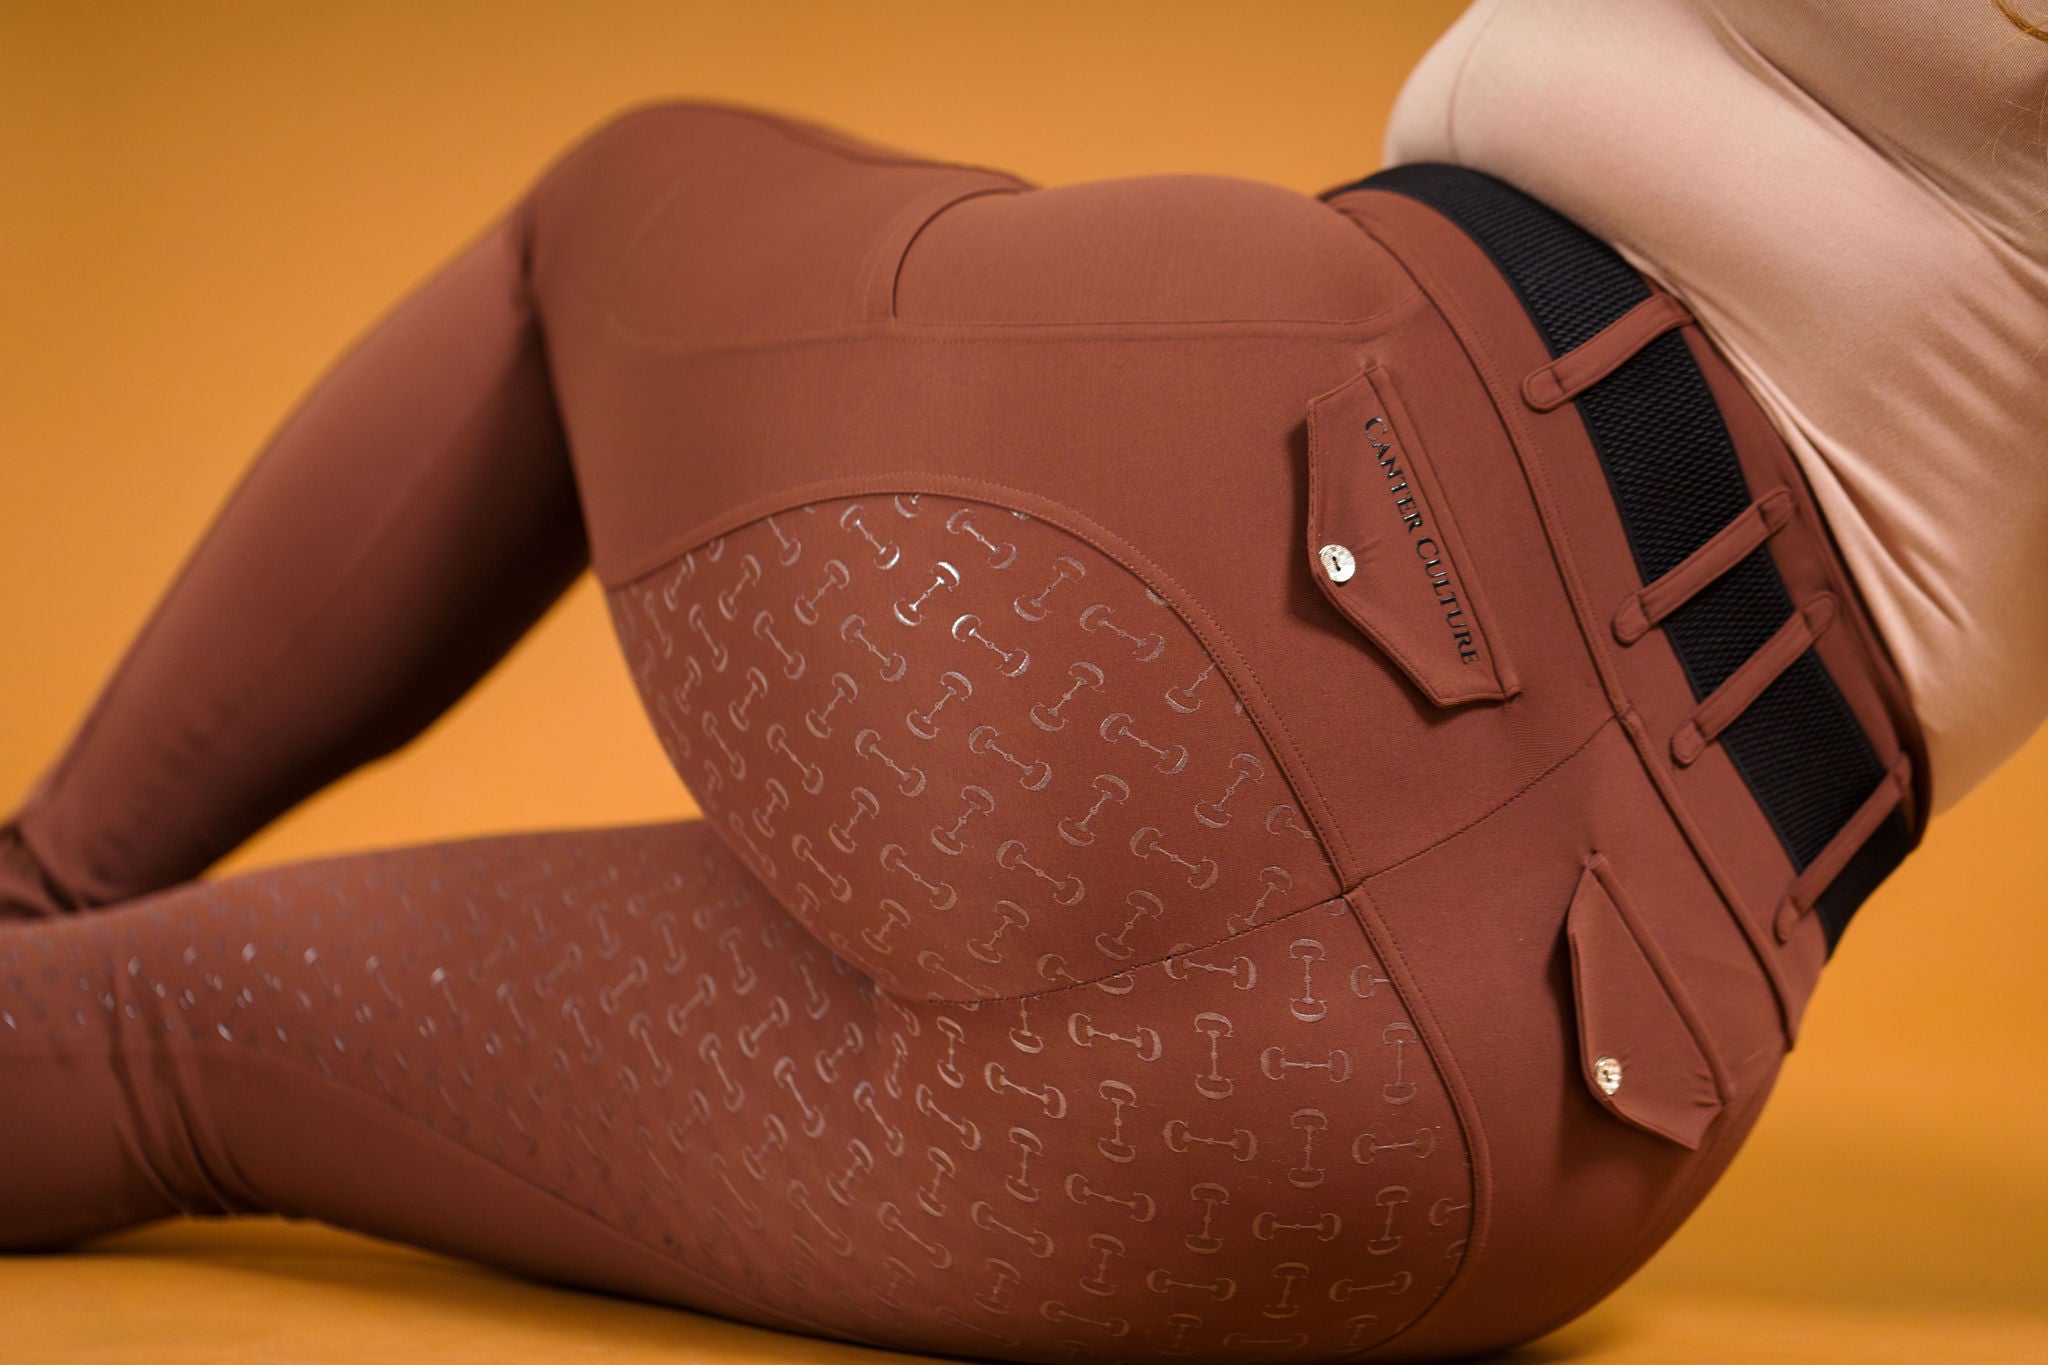 Athletic Breech - Leather Brown